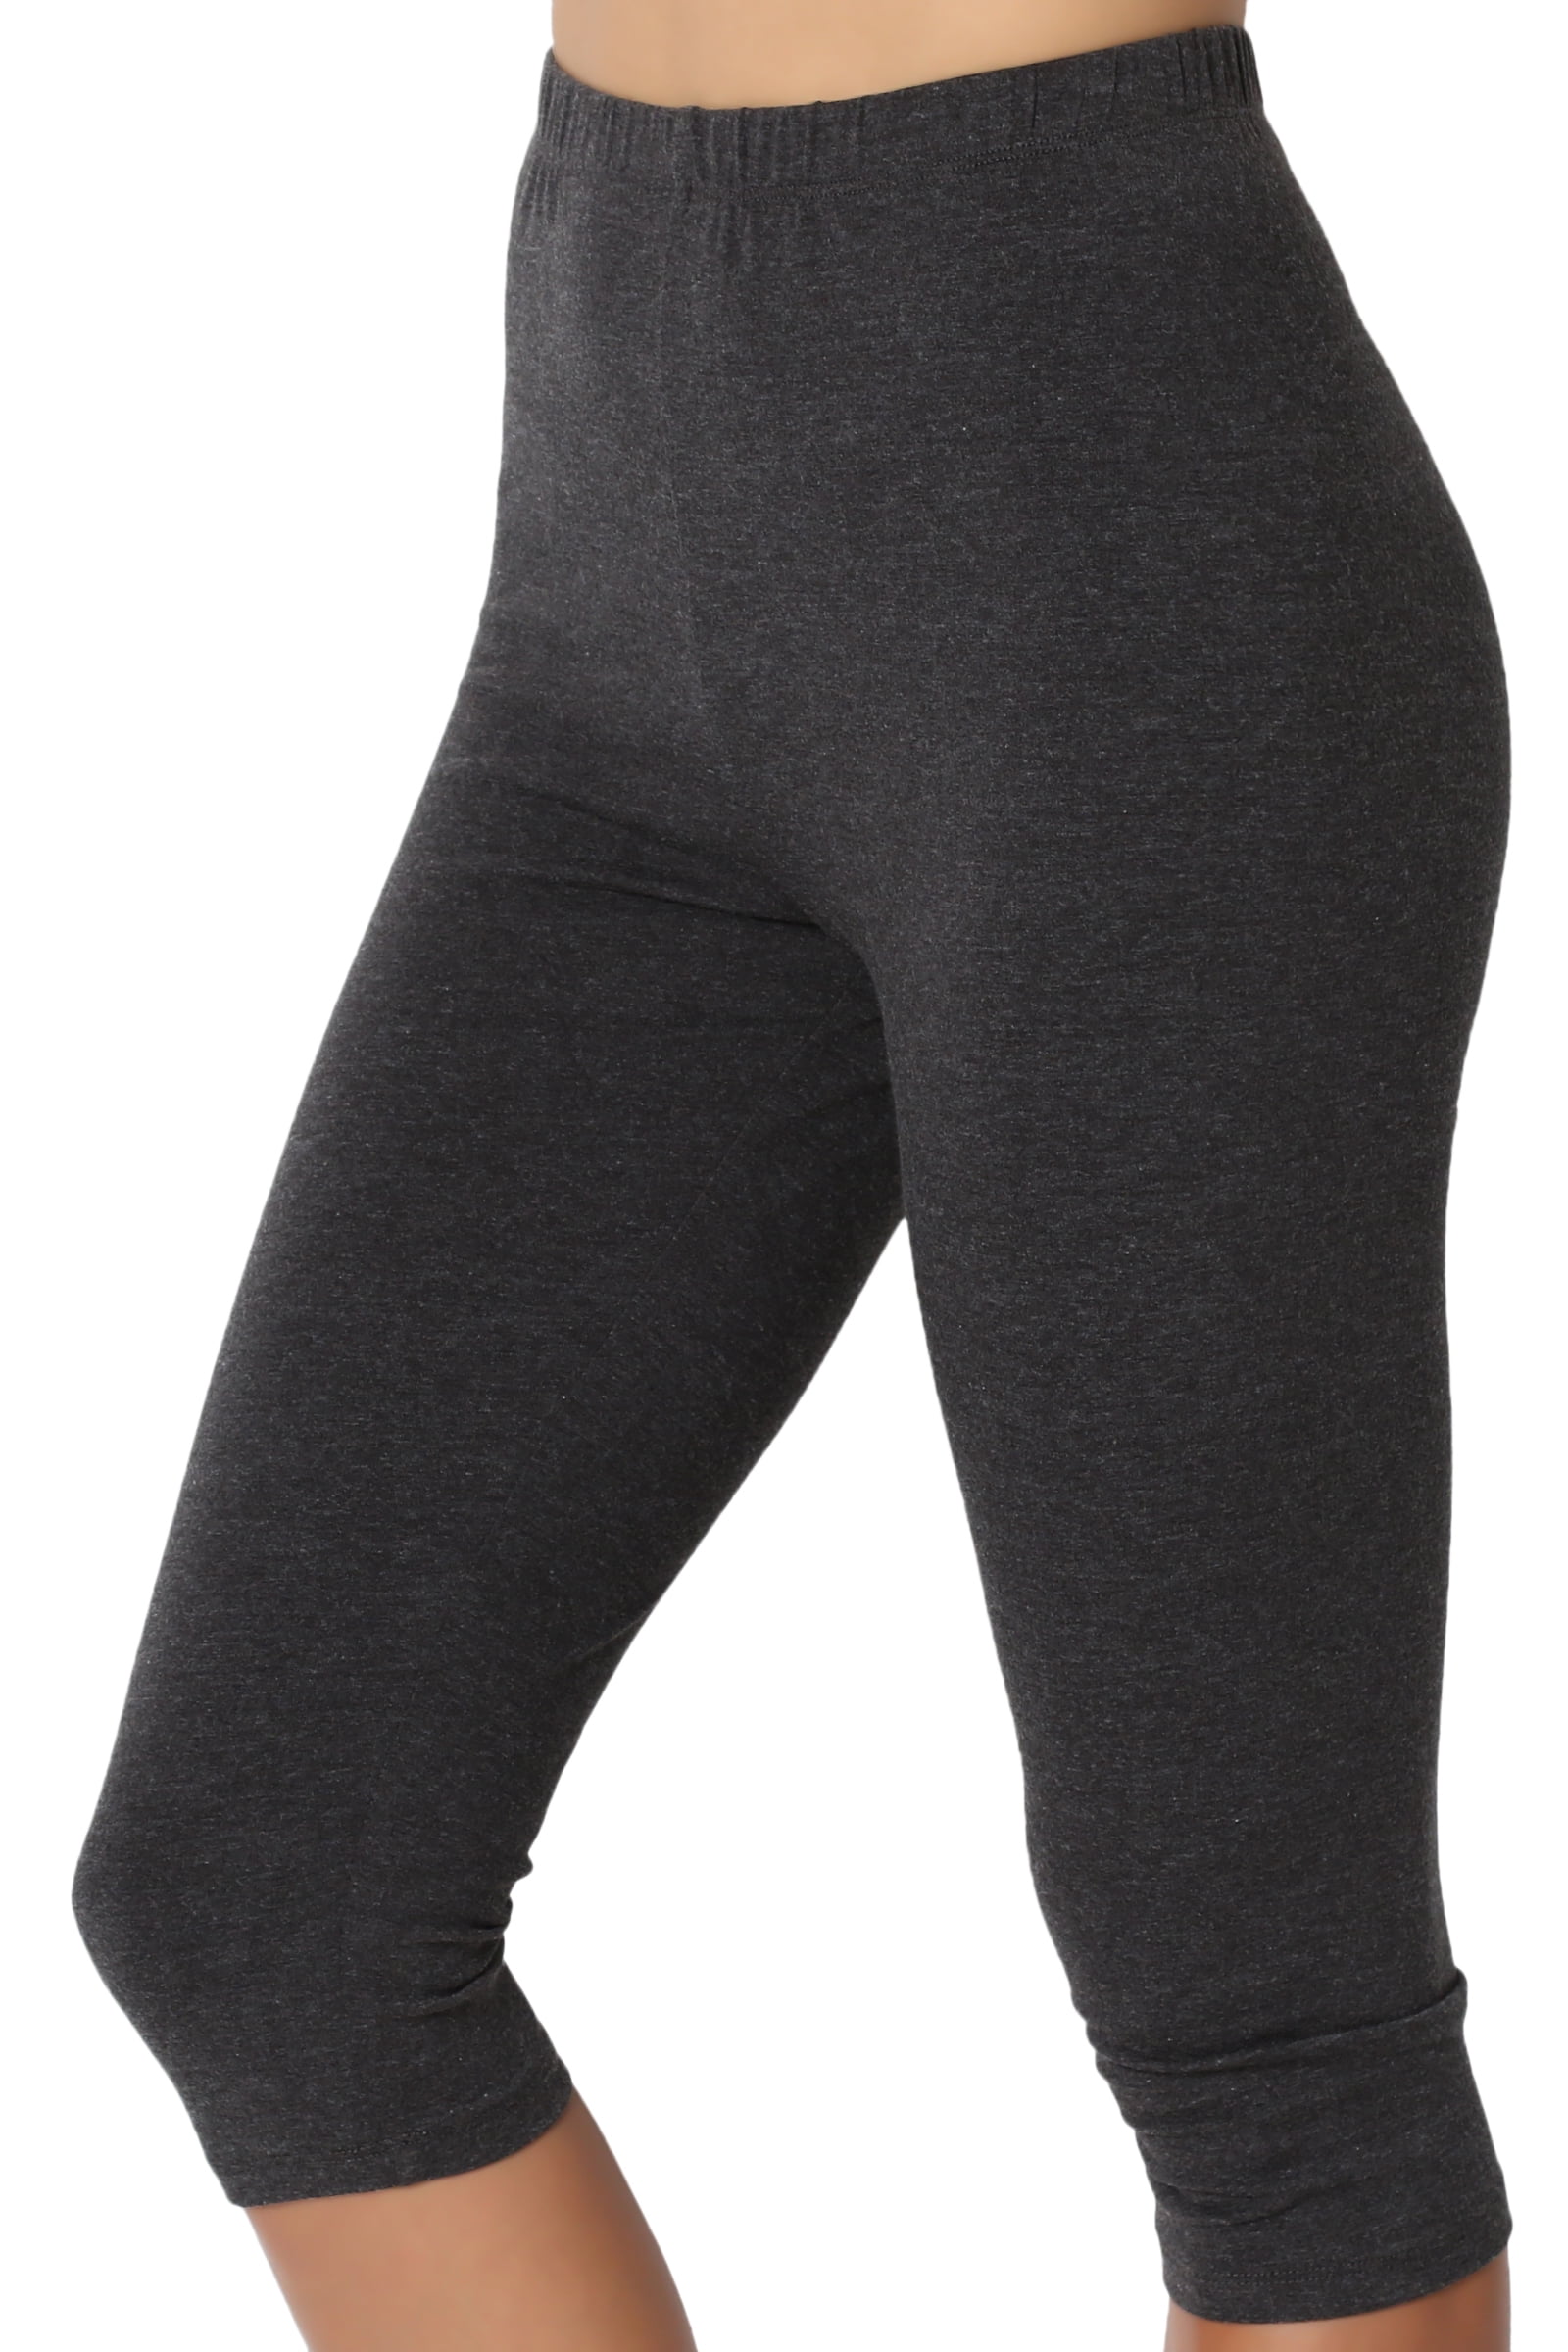 Simple Below The Knee Workout Pants for Women